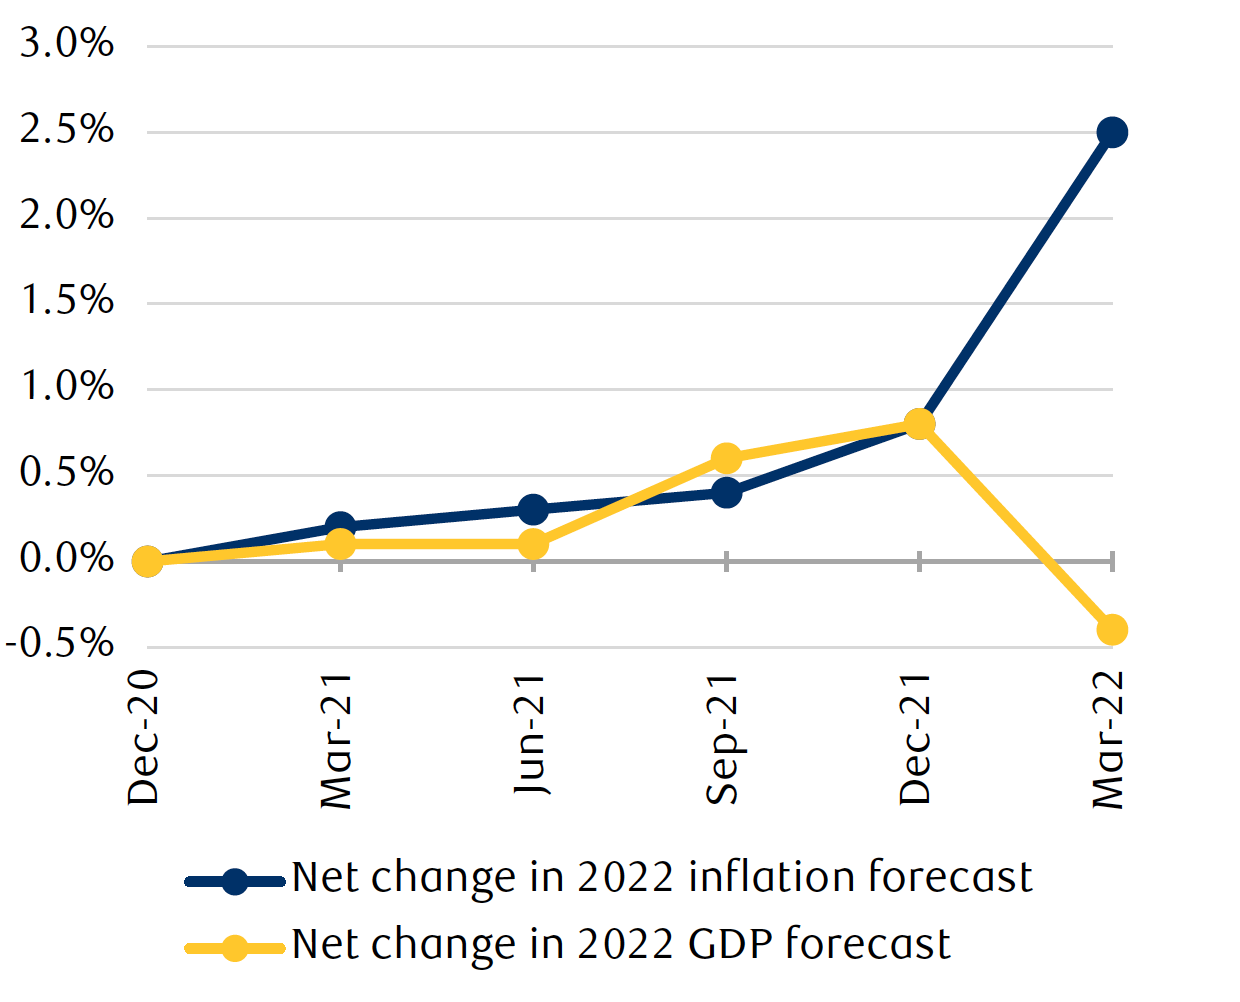 The line chart shows how the Fed's economic projections for 2022 have changed since December 2020, with the March meeting showing a sharp upgrade of inflation expectations, paired with a notable downgrade of growth expectations.